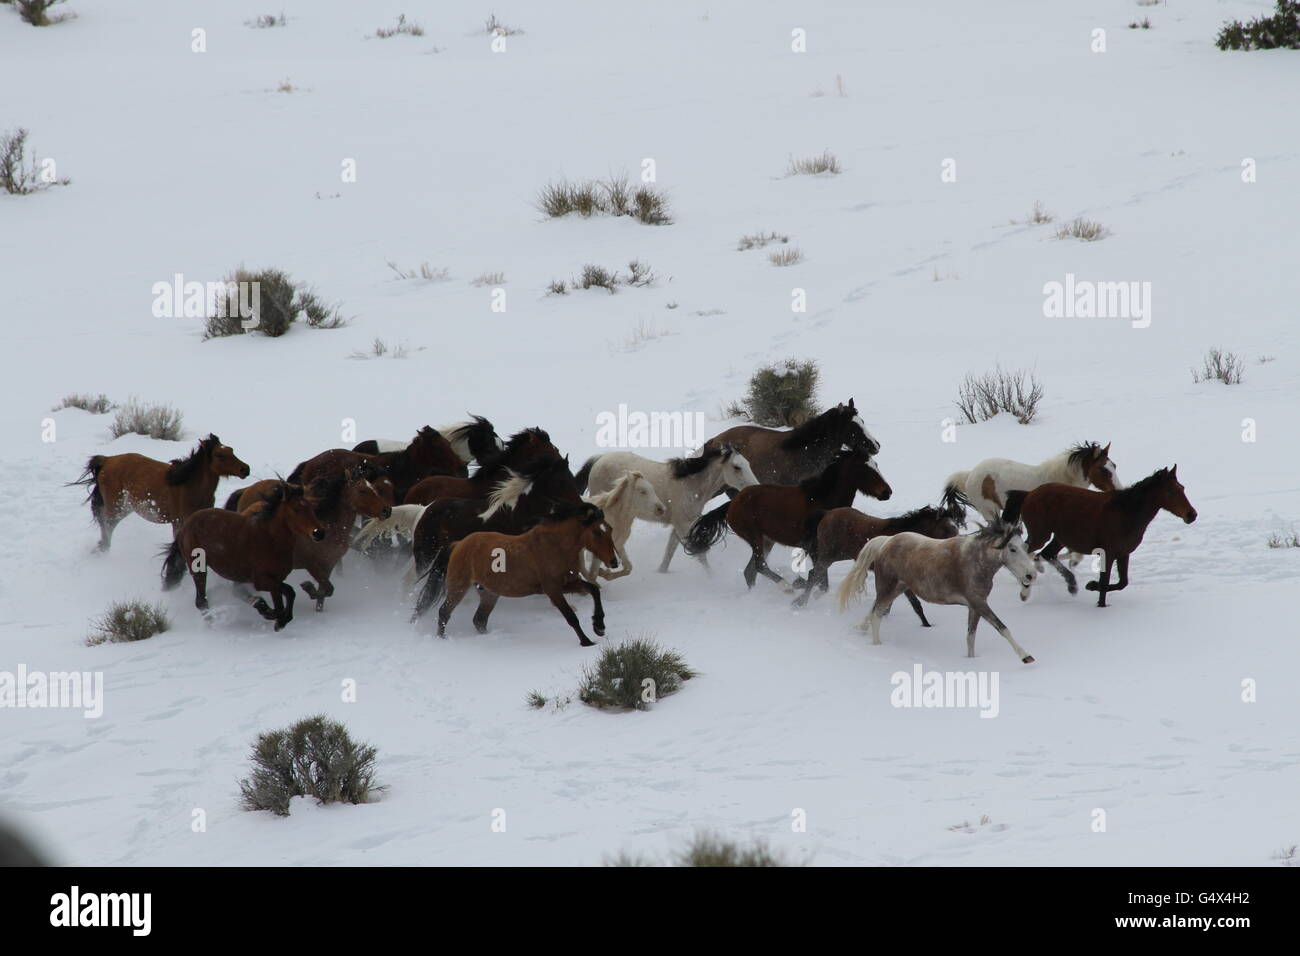 Wild horses in the snow in the Swasey Herd Management Area February 27, 2012 near Delta, Utah. Stock Photo